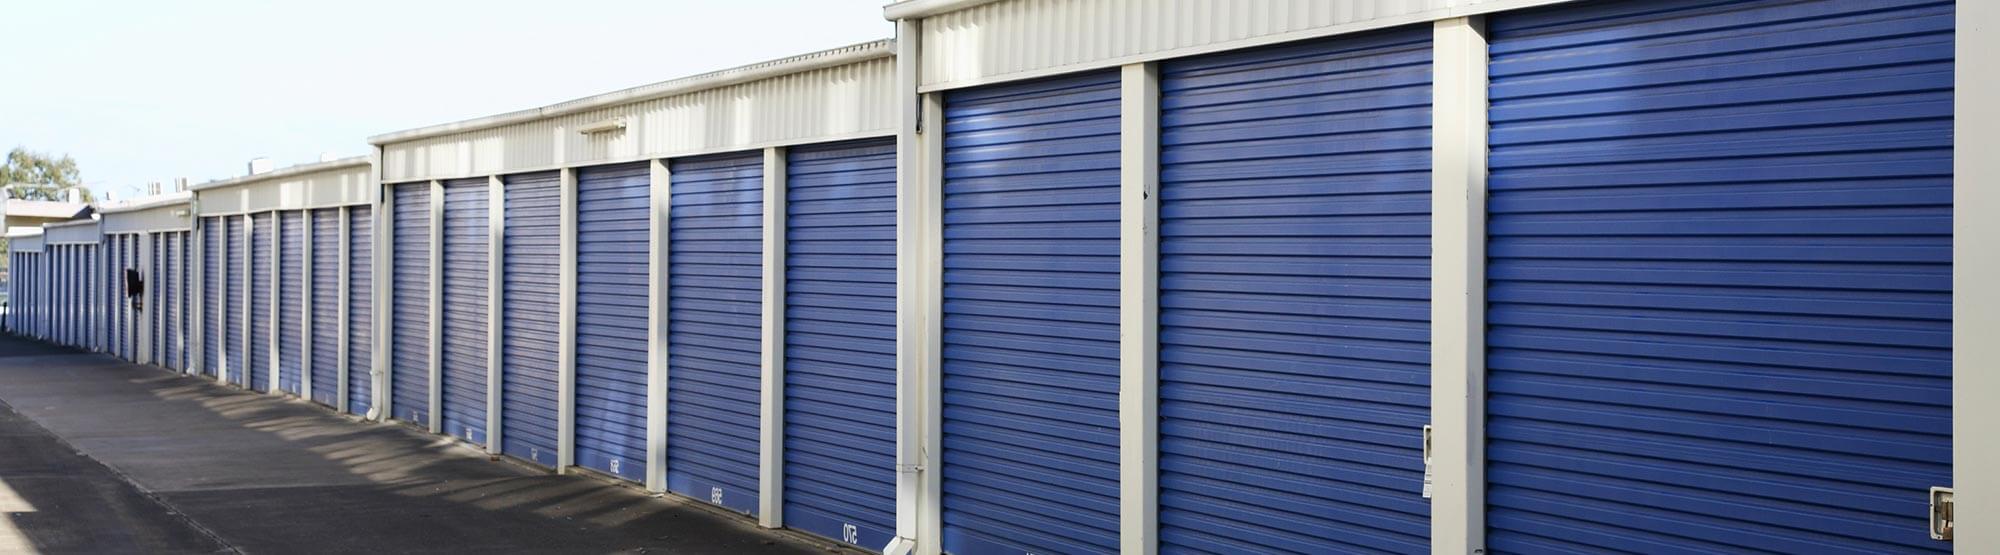 Self Storage in Virginia and Maryland